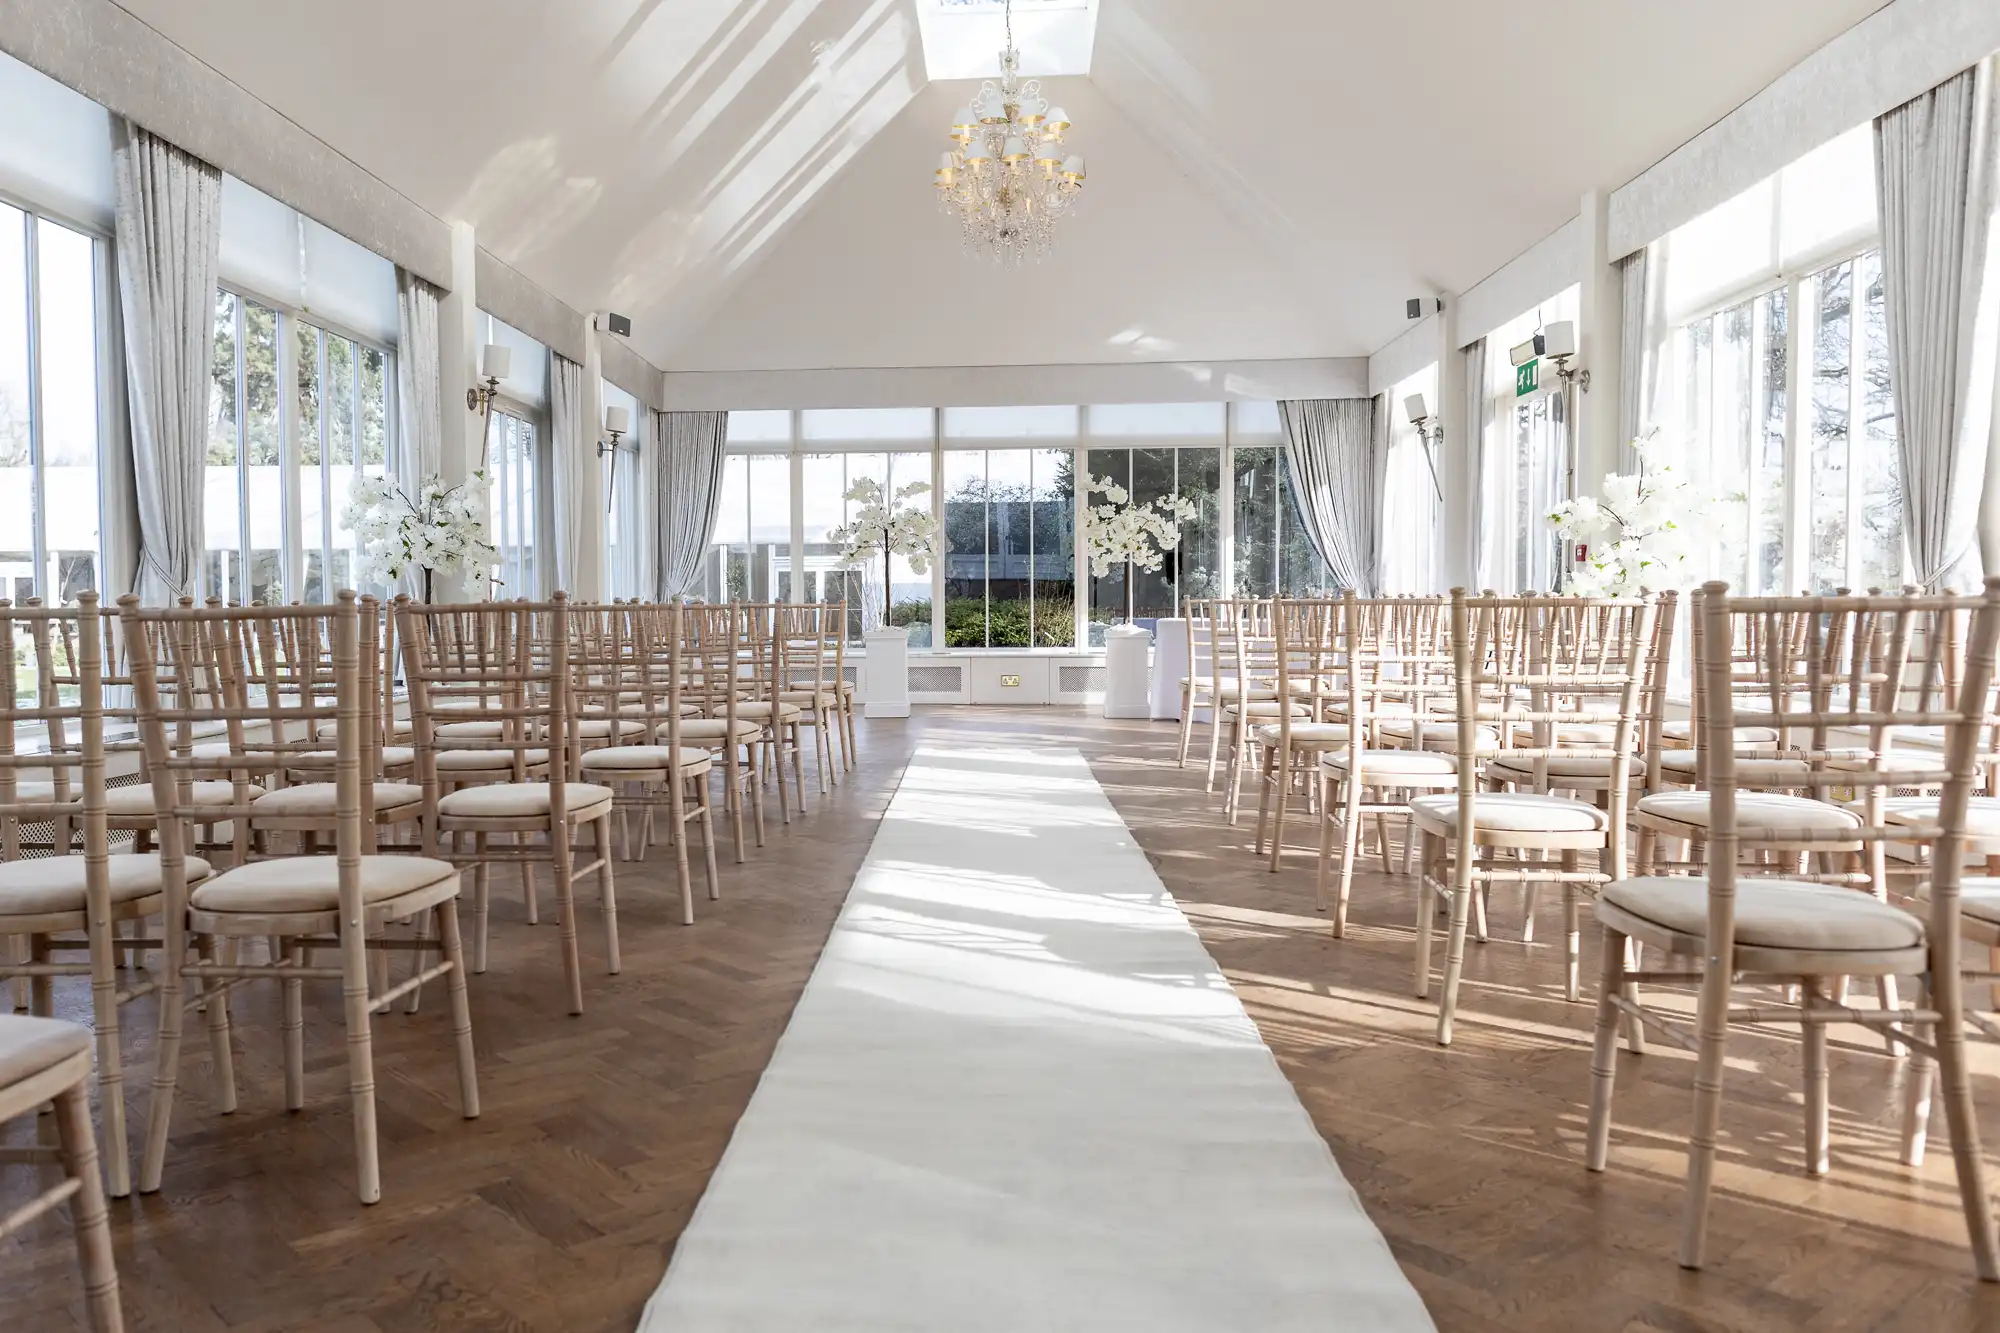 A bright, sunlit wedding ceremony room with wooden chairs arranged in rows along a central white aisle, leading to a white altar beneath a small chandelier.